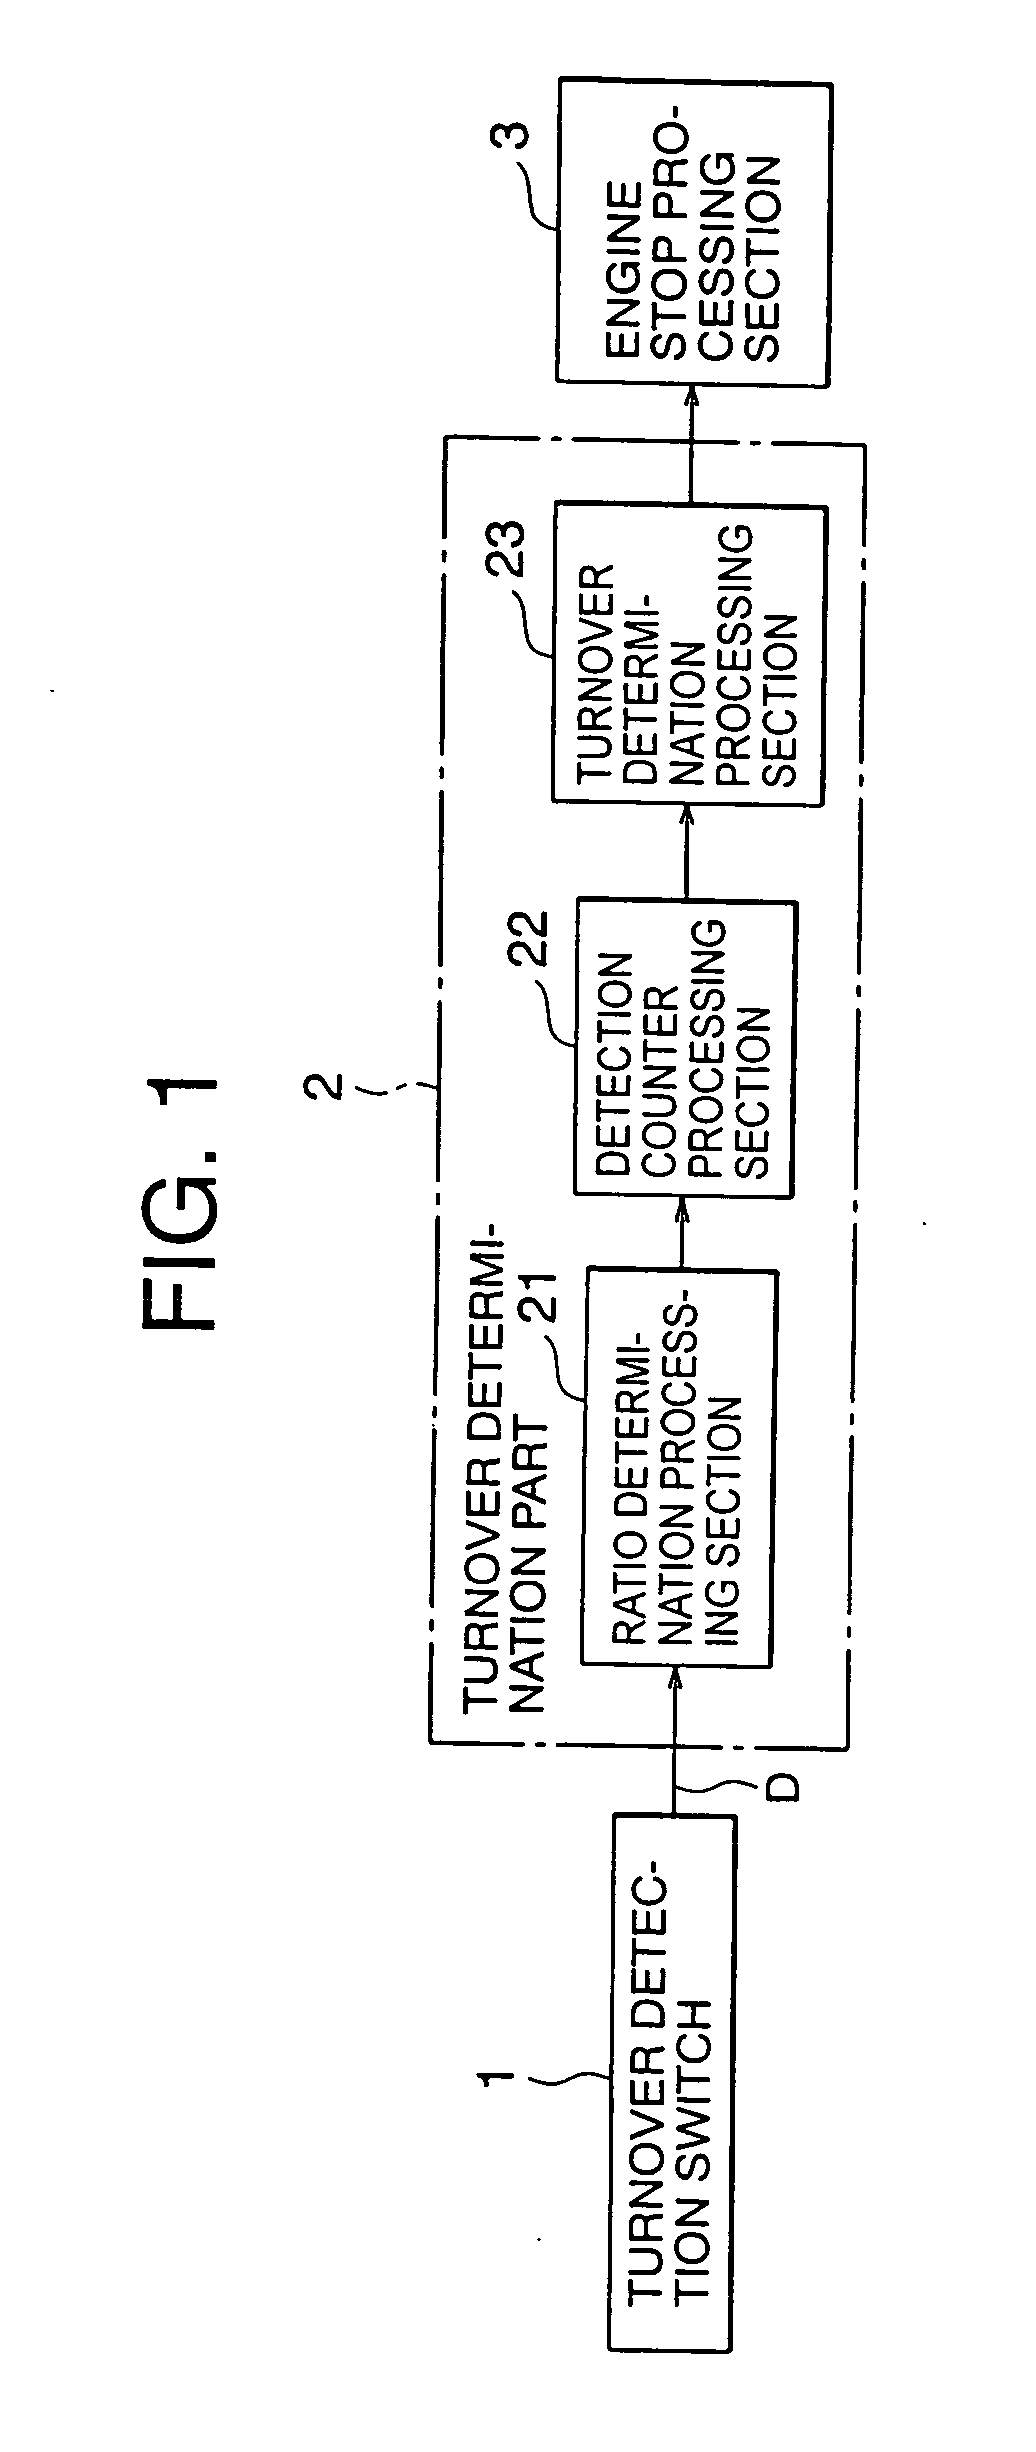 Control apparatus for a hull with a four-cycle engine installed thereon